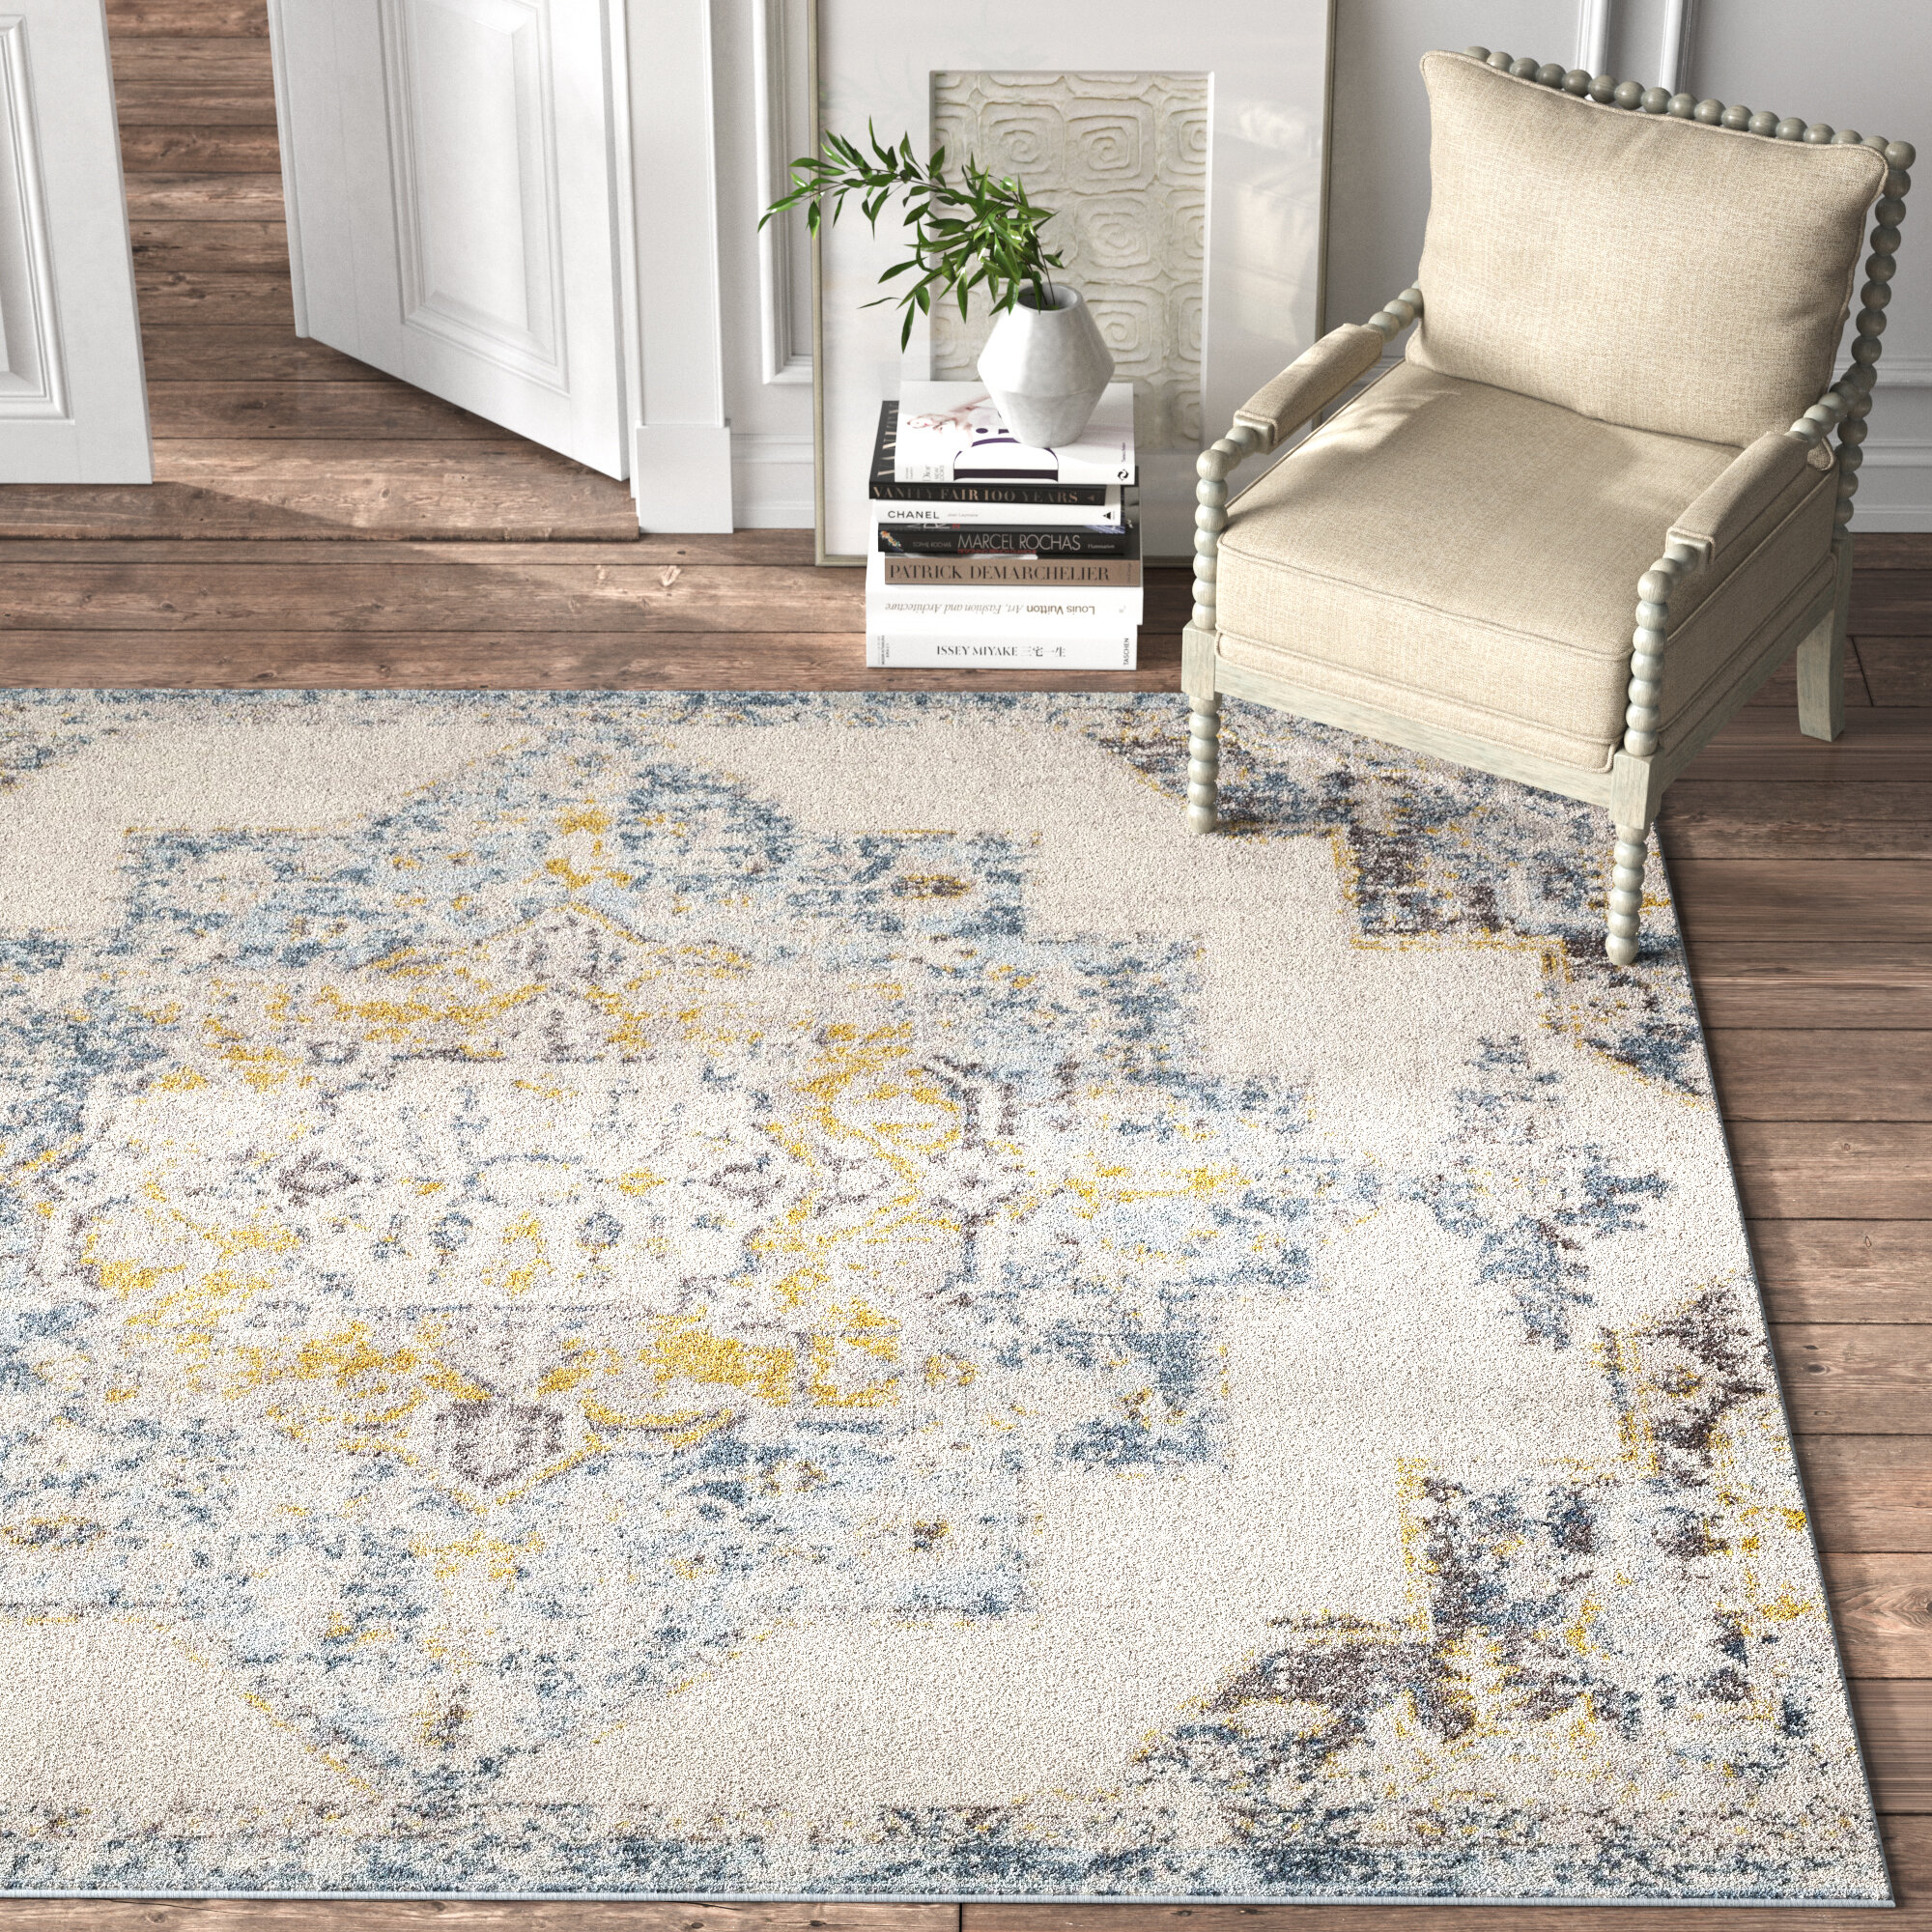 Details about   New Modern Quality Large Small Soft Ochre Yellow Grey Silver Rug Runner Rugs Mat 